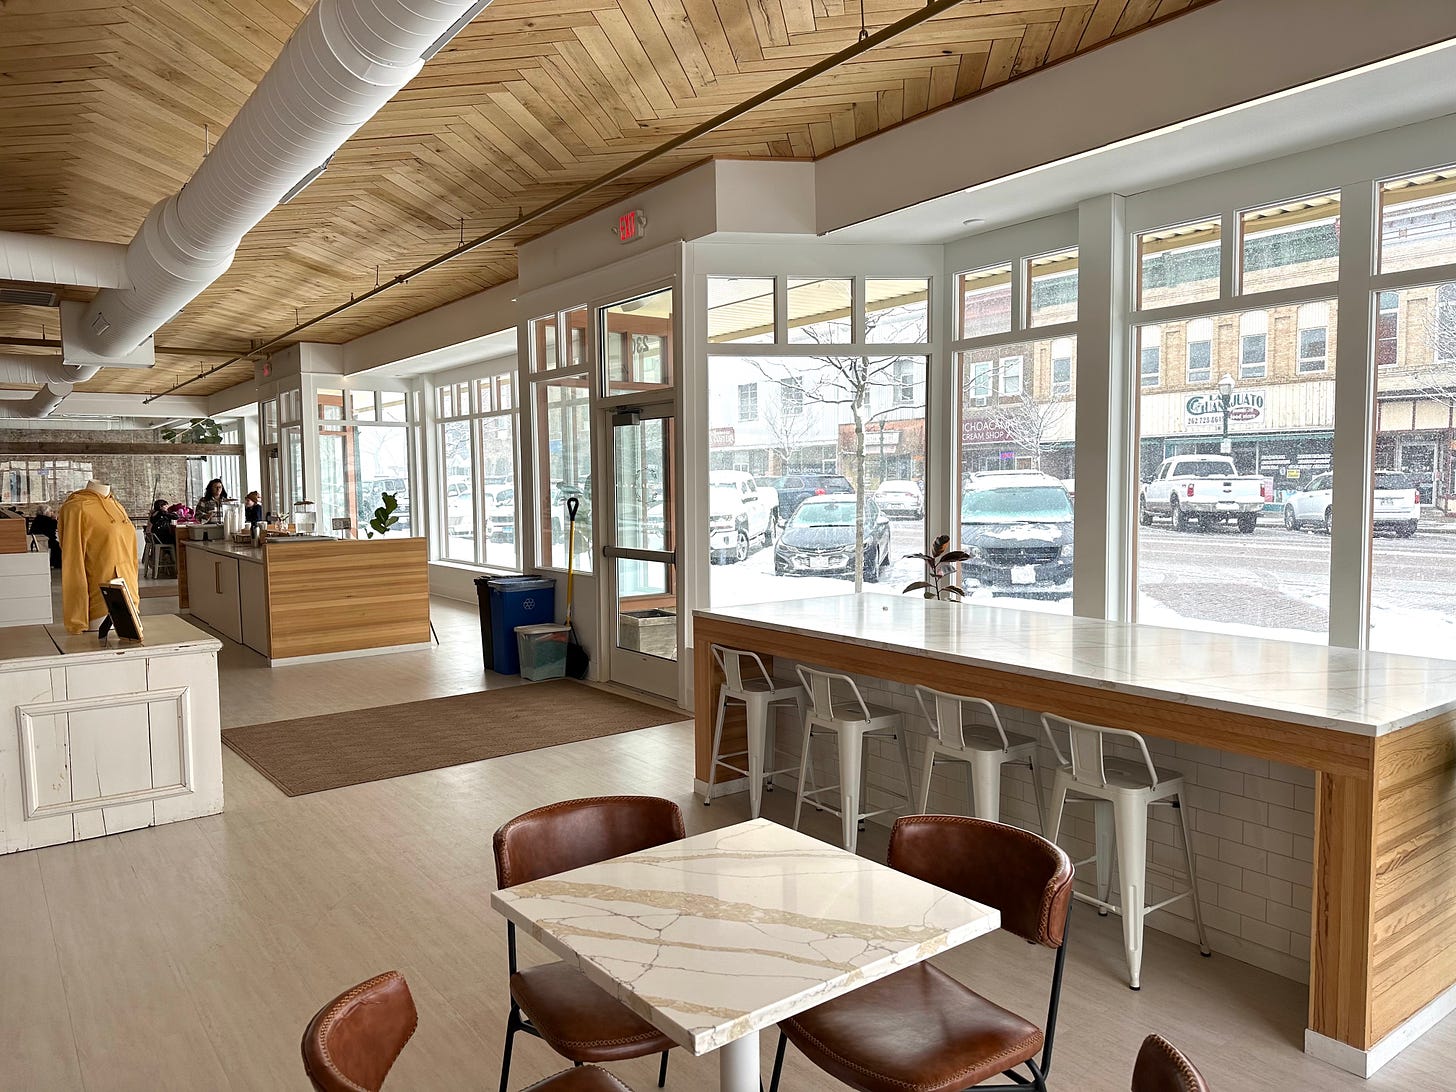 Interior of a coffee shop with chairs and countertops looking out through glass windows at the snow covered cars and street.